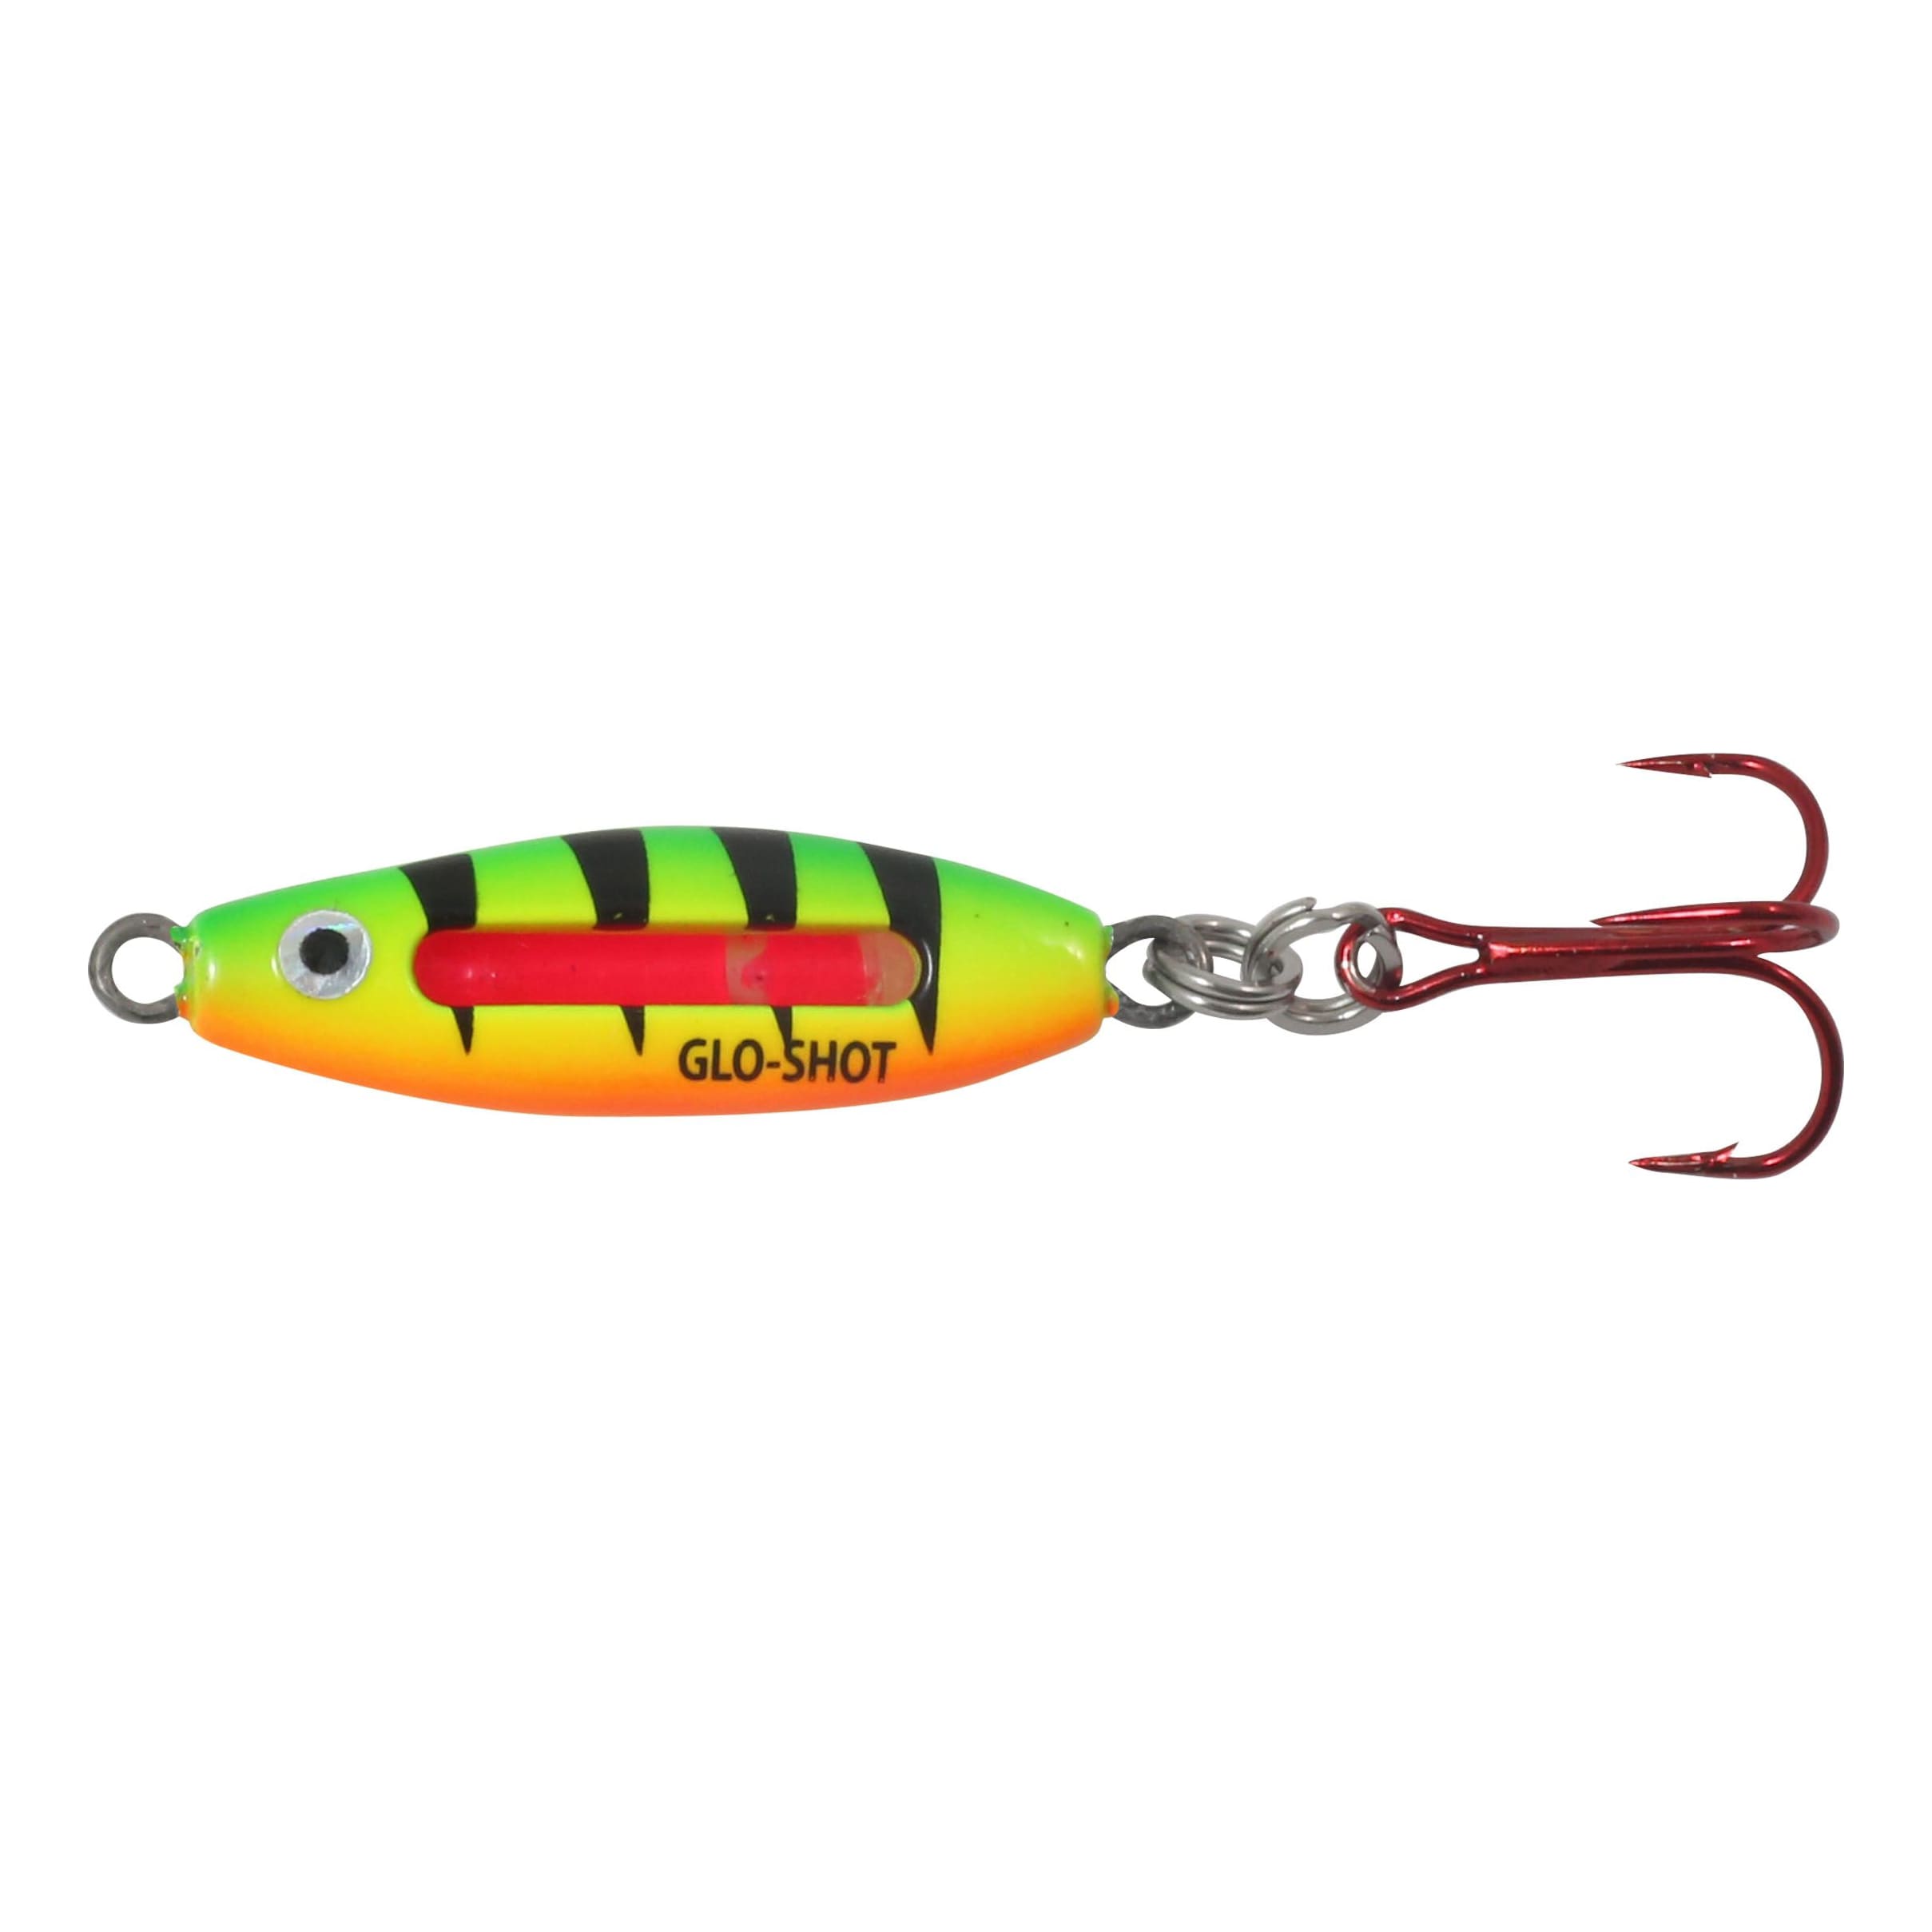 PK Spoon Single Treble in Red Tiger Glow, Size 1/8 Oz from The Fishin' Hole